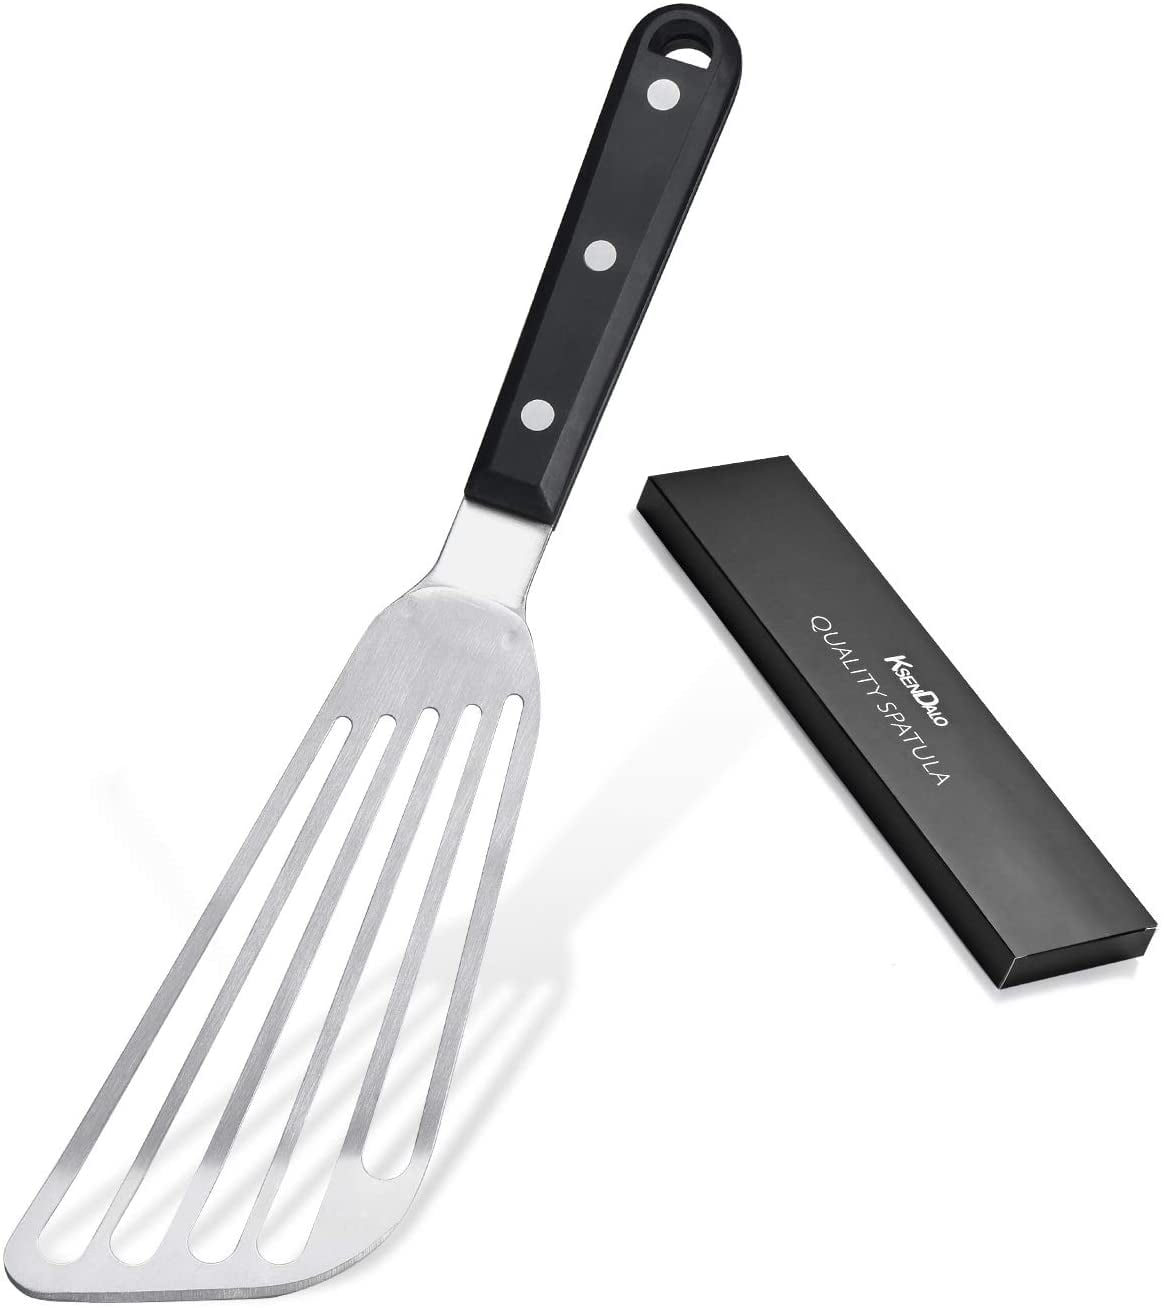 Lightweight but sturdy Turner KSENDALO Wide Thin Slotted Nylon Spatula with Brushed Stainless Steel Handle 1